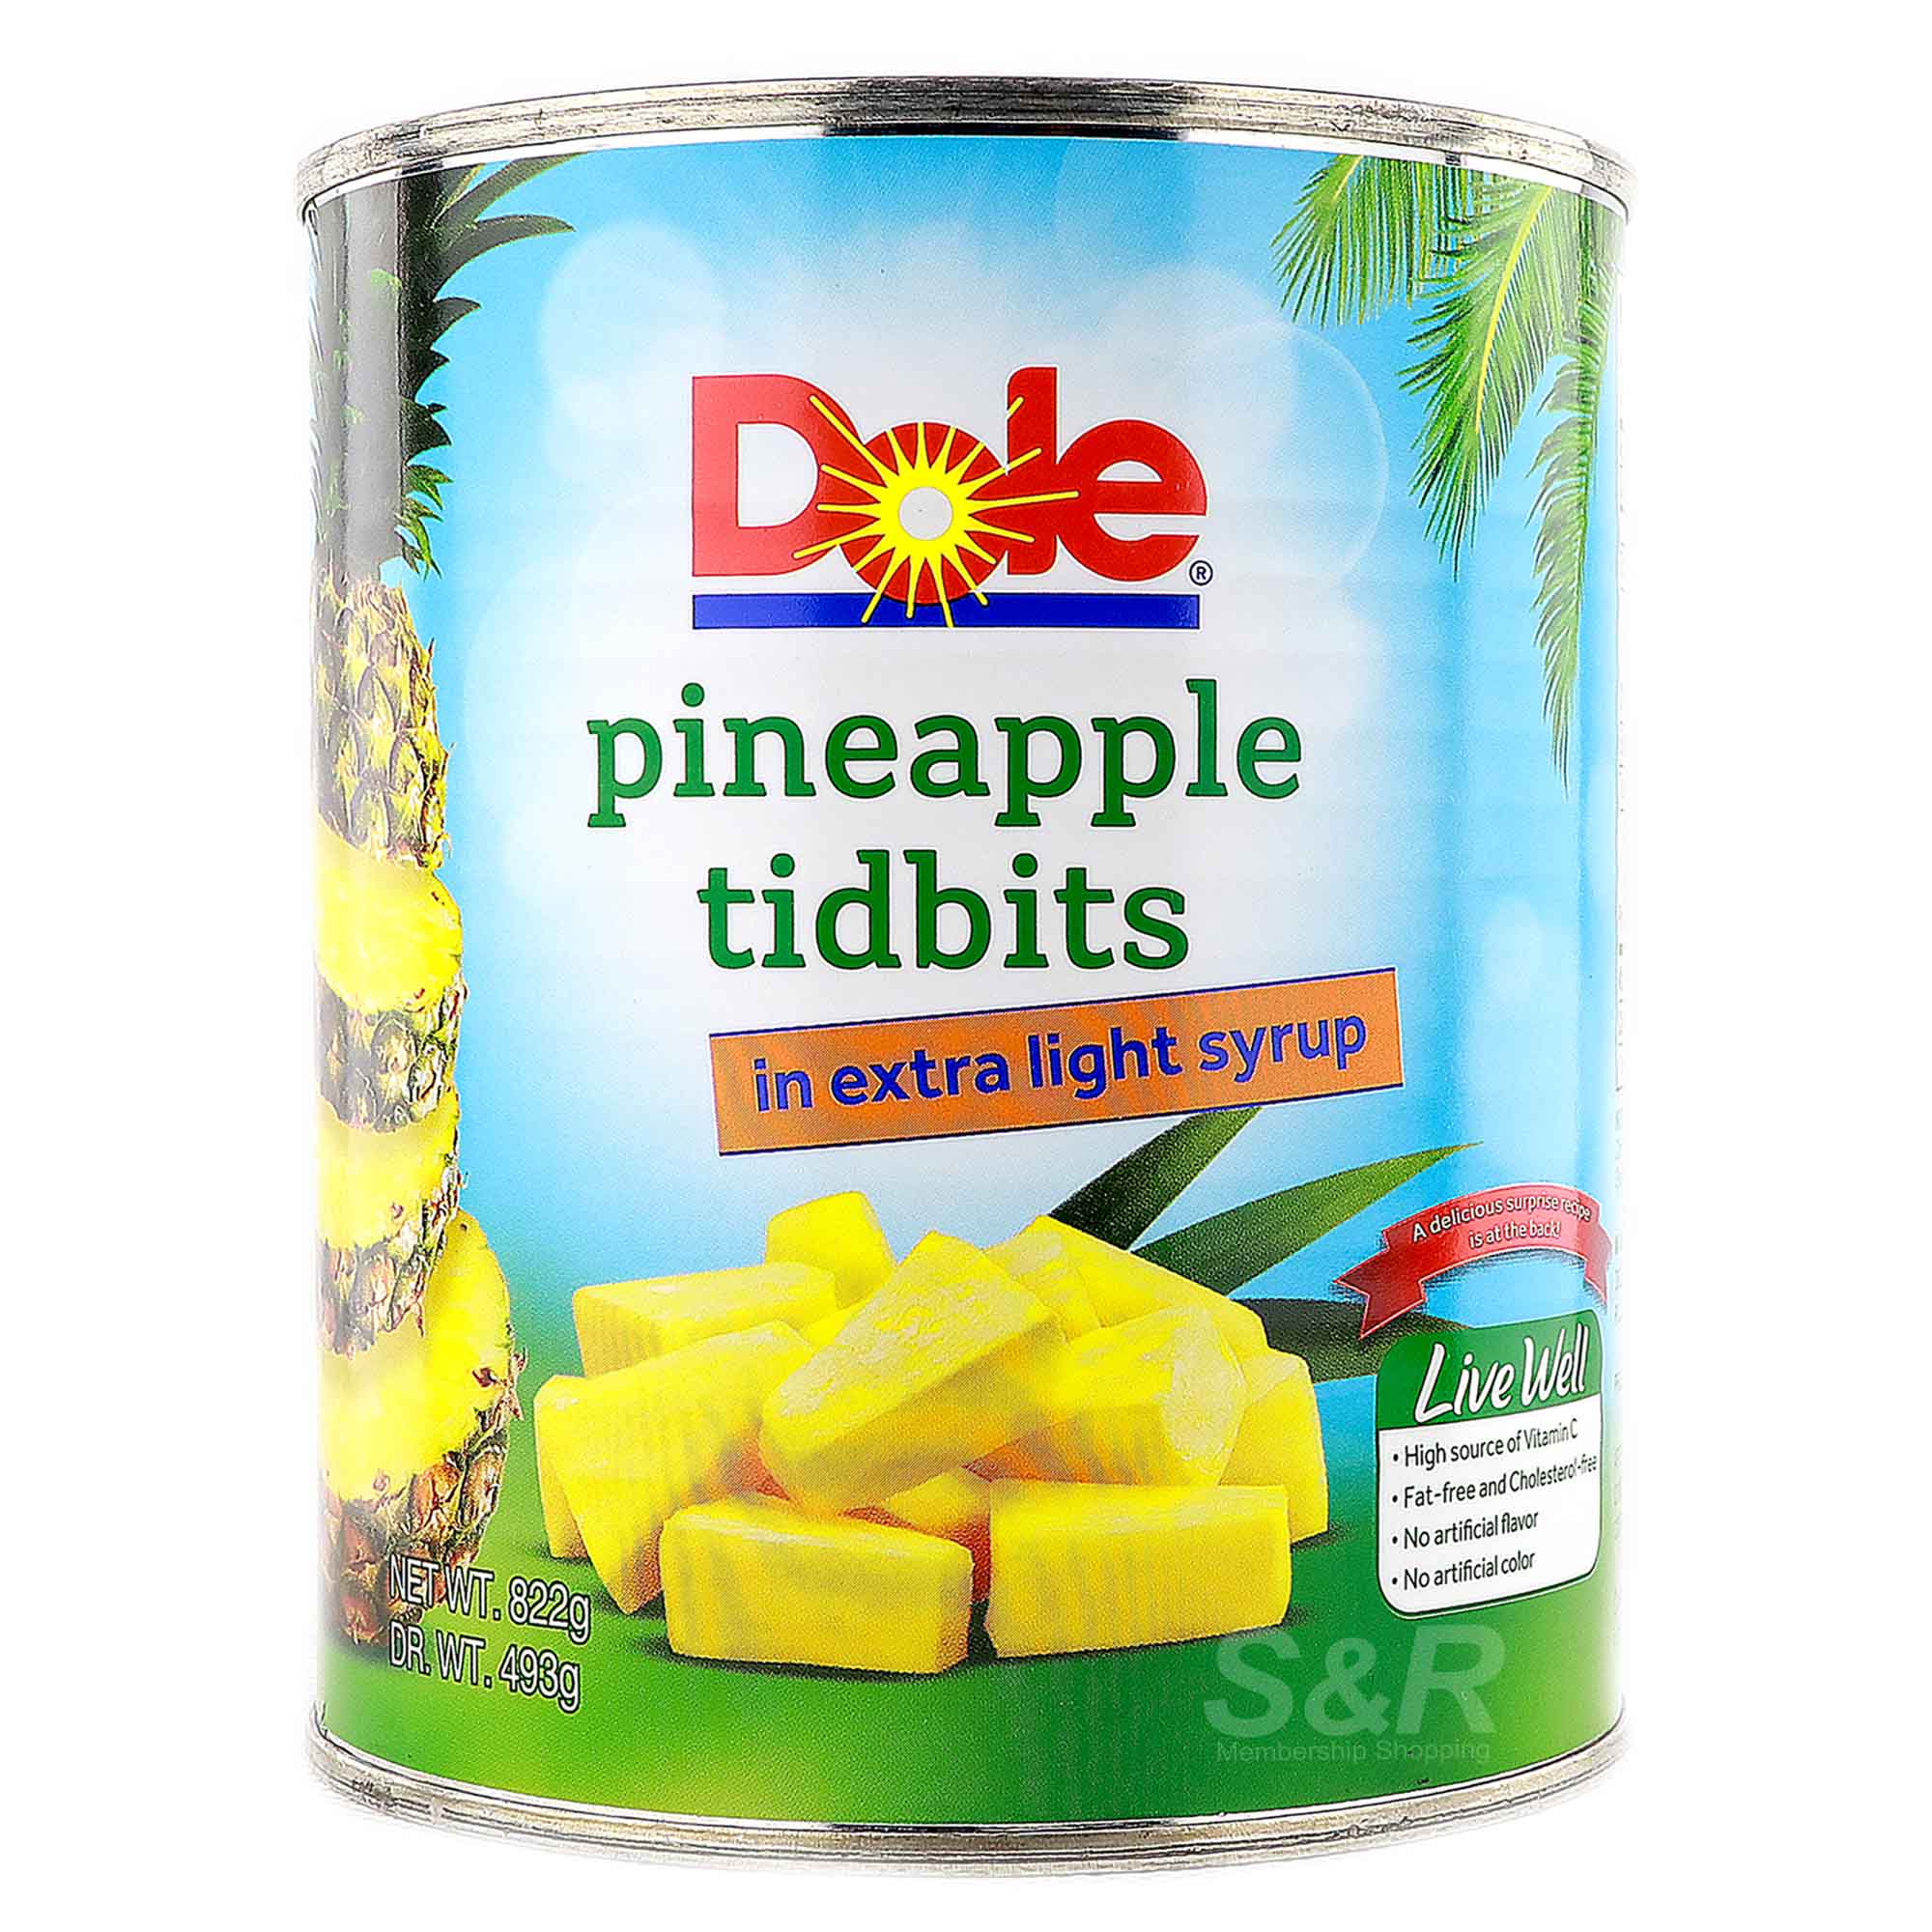 Dole Pineapple Tidbits in Extra Light Syrup 822g